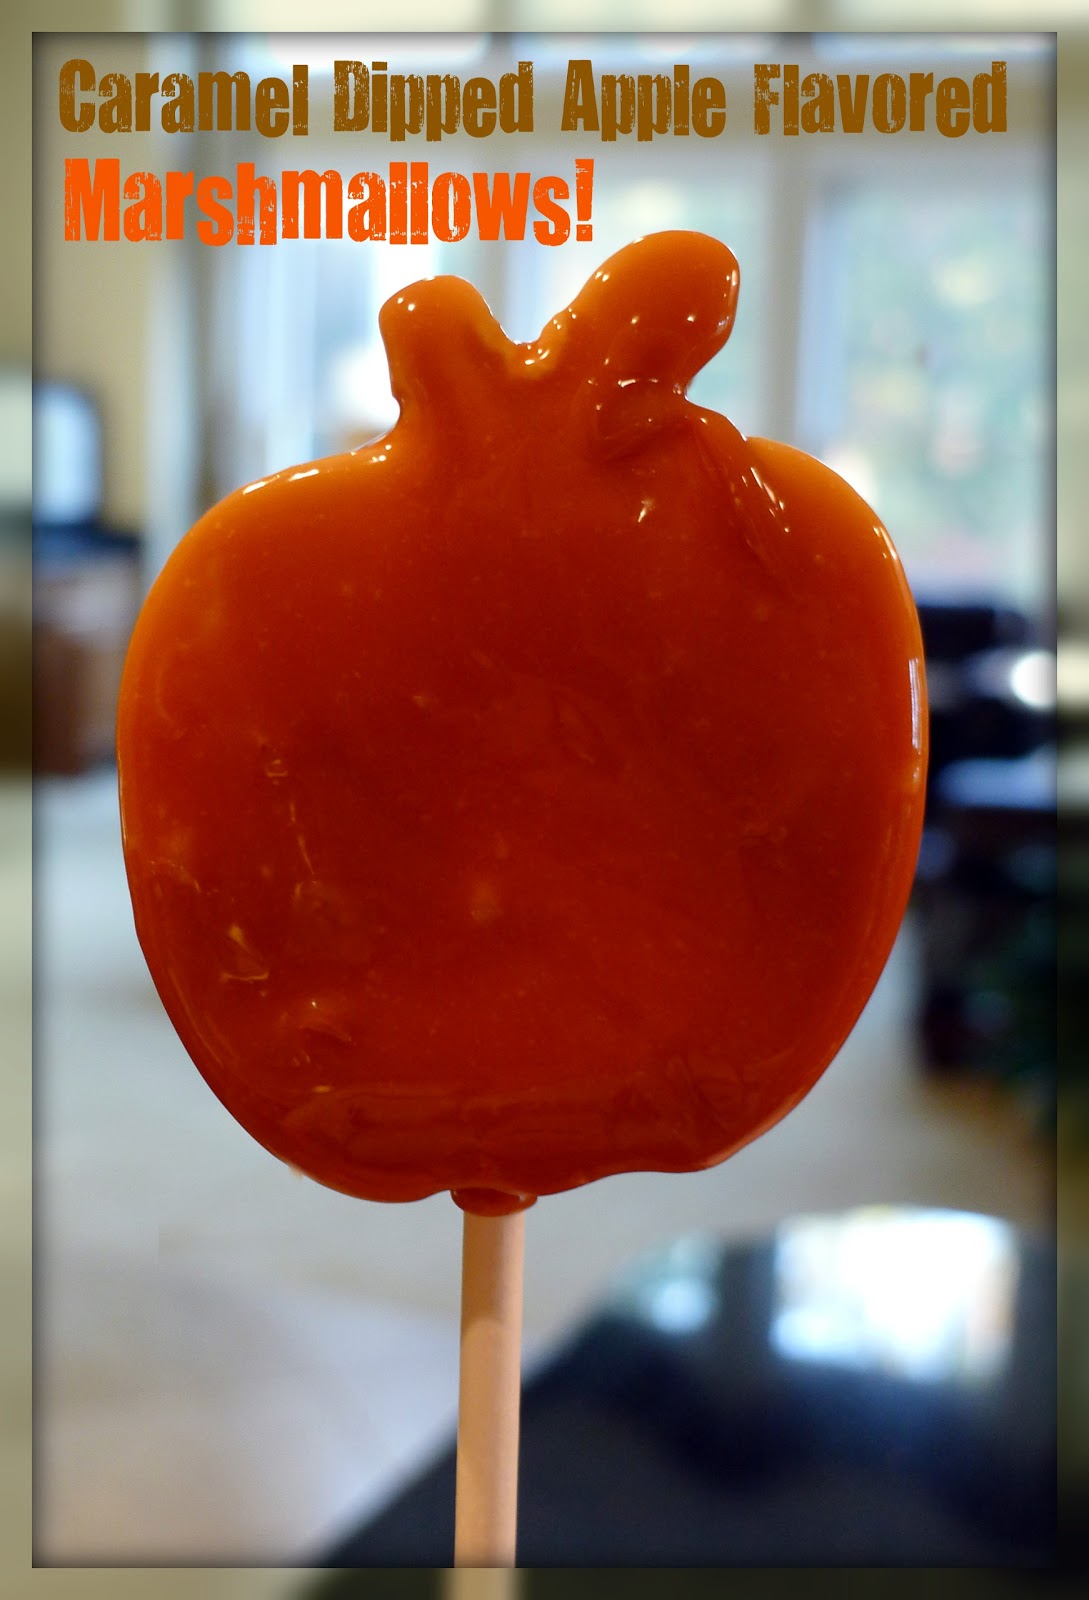 Sugartown Sweets: Caramel Dipped, Apple Flavored Marshmallows!